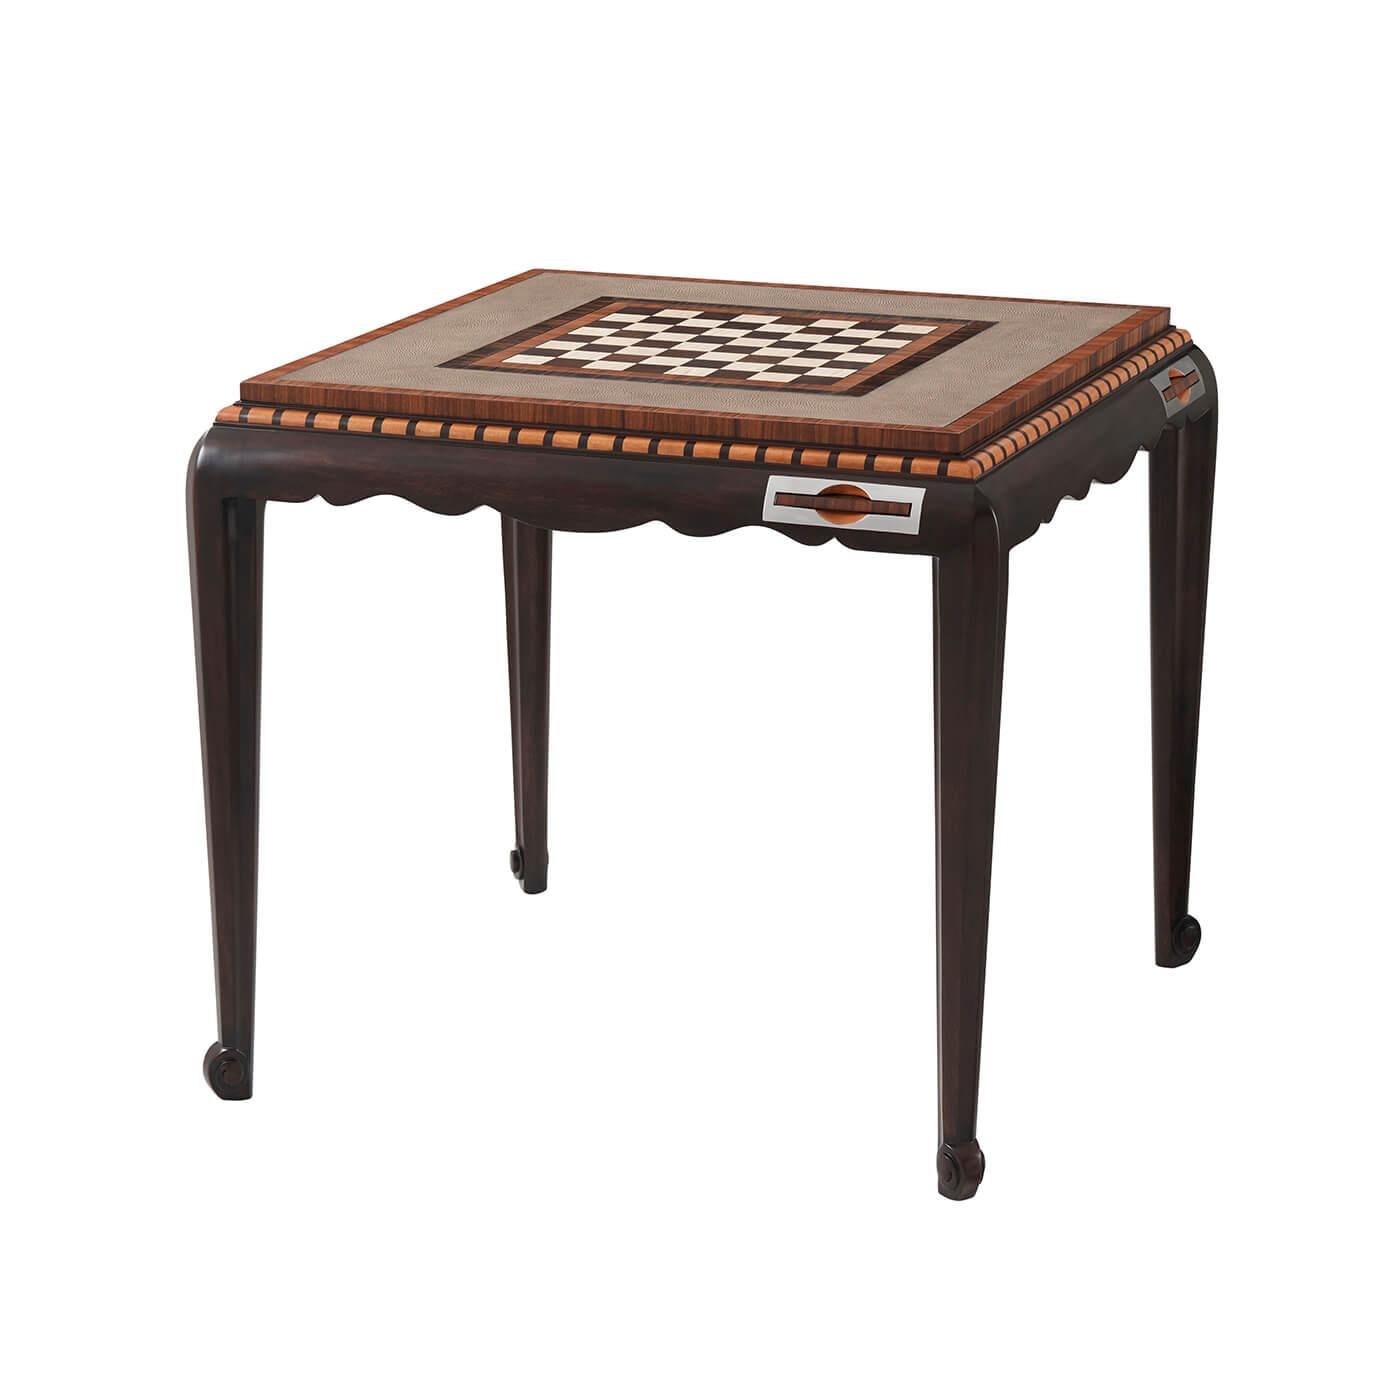 A rosewood veneered and mahogany games table, the square top with a chessboard inlay within a faux shagreen and rosewood cross-banded border, the reverse with a backgammon board inlay, above a quarter round checker banded molded edge above a gently